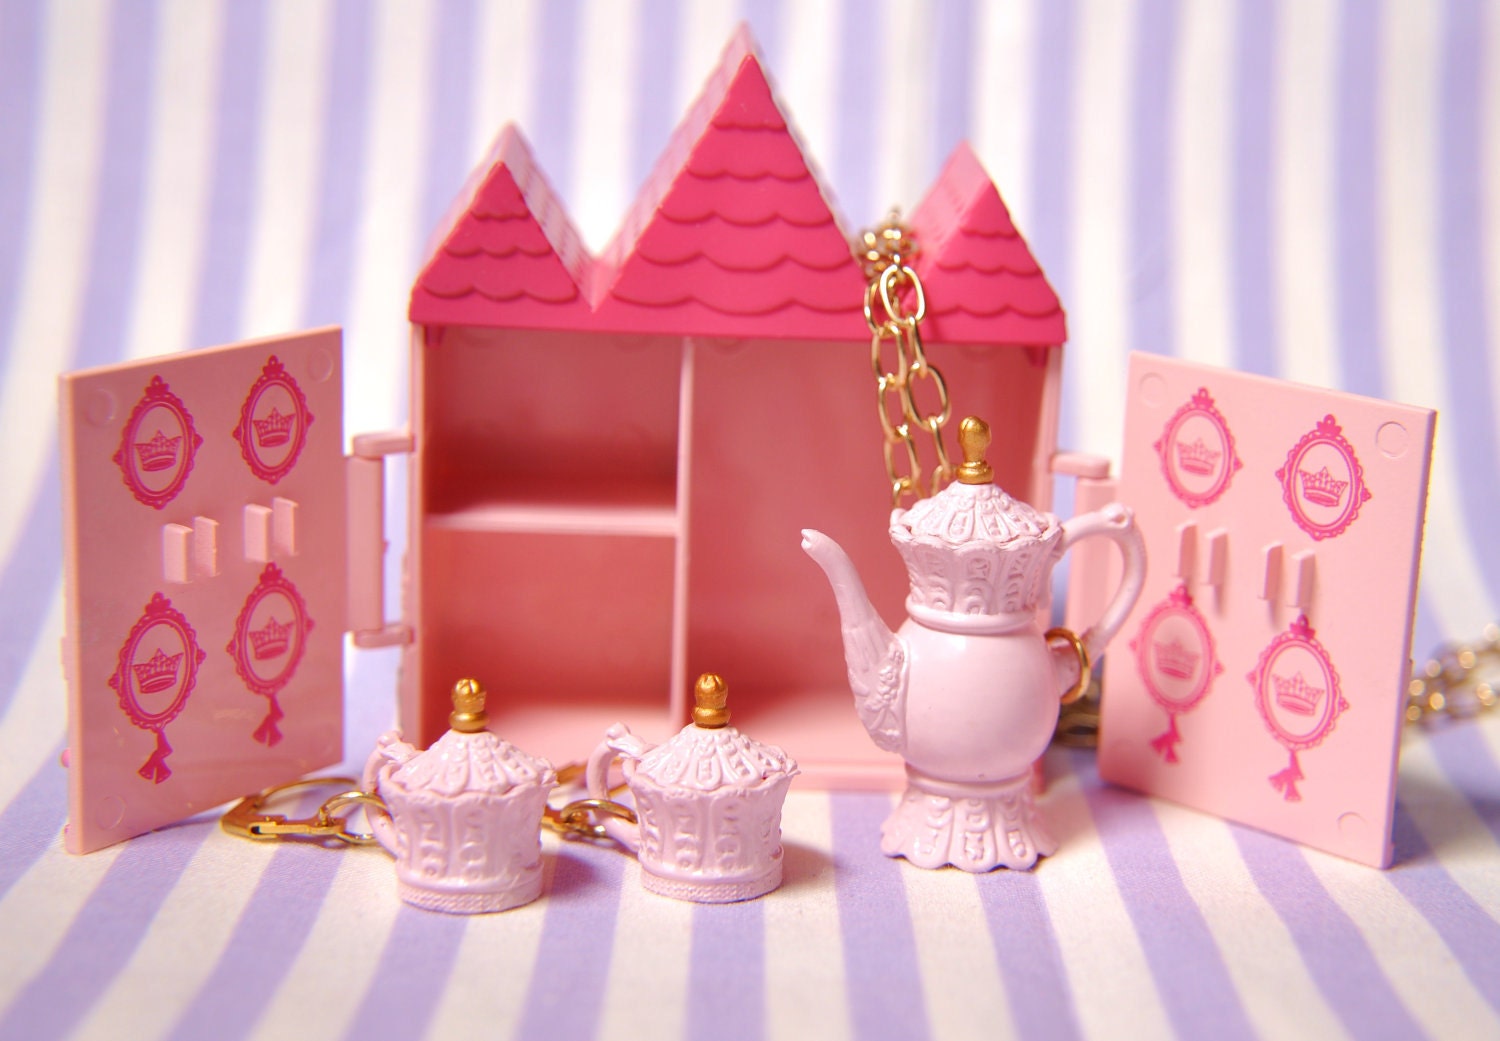 Pretty Pink Princess Tea Pot and Matching Earrings Jewelry Set Comes with Castle